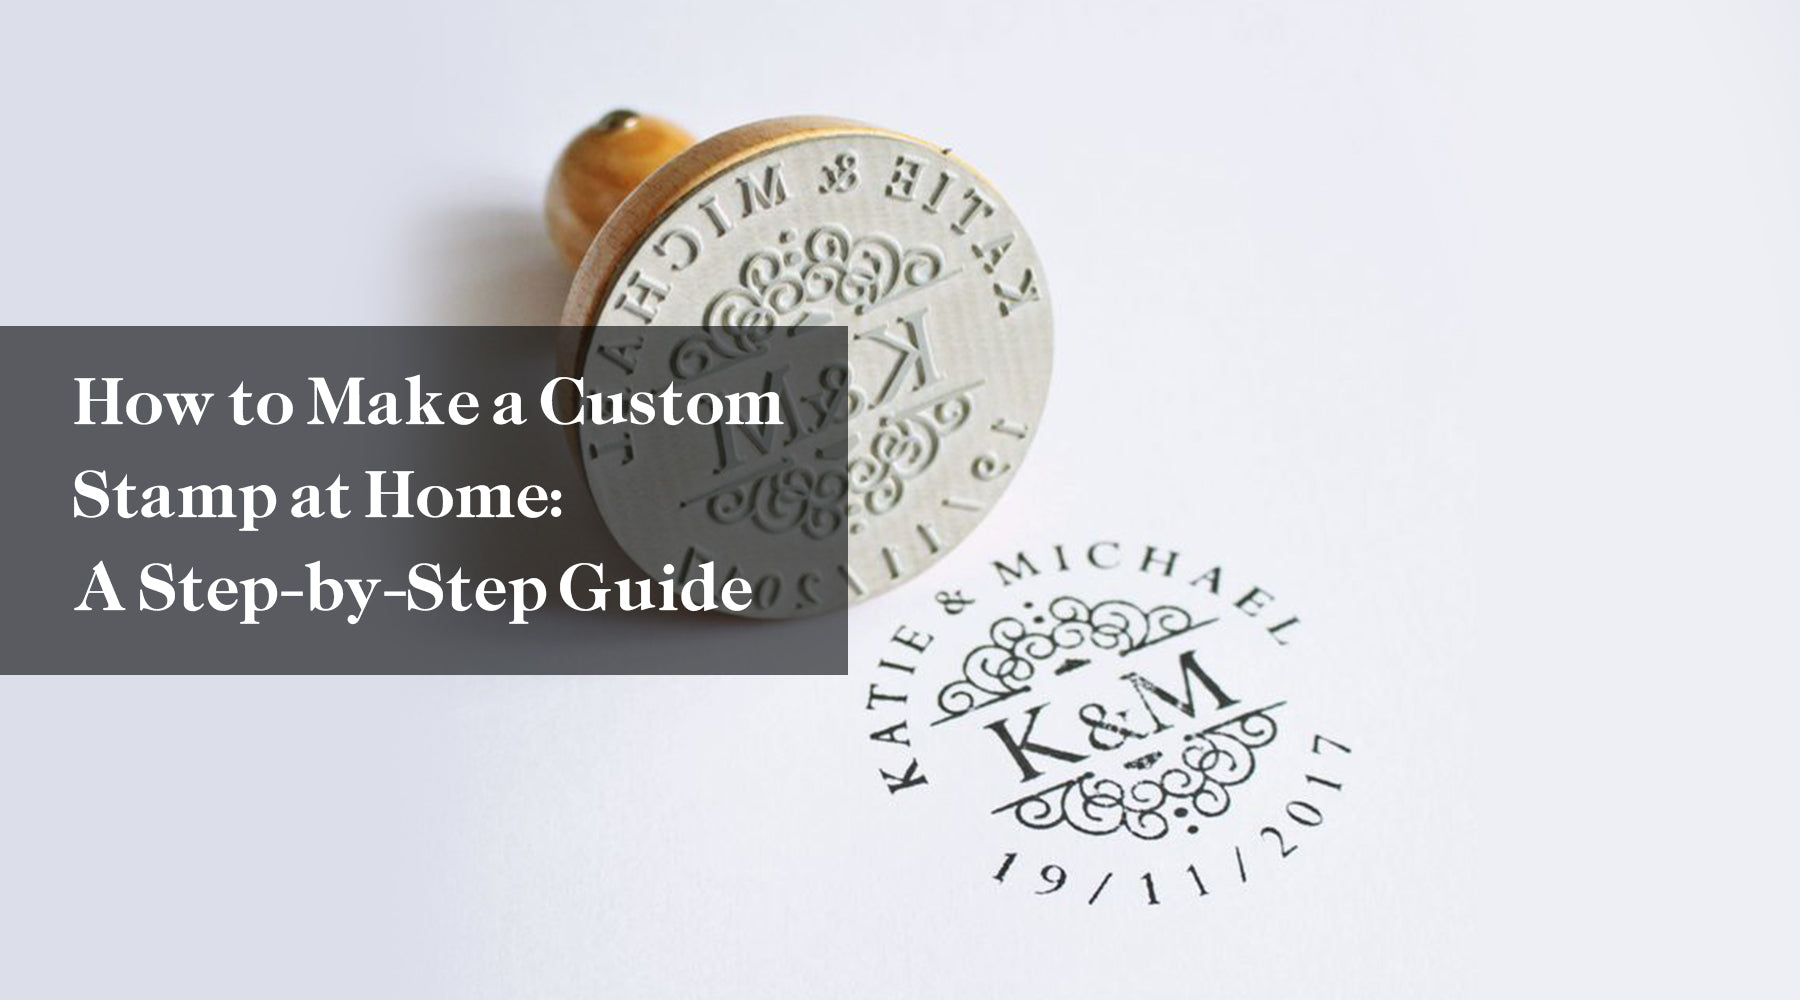 How to Make a Custom Stamp at Home: A Step-by-Step Guide